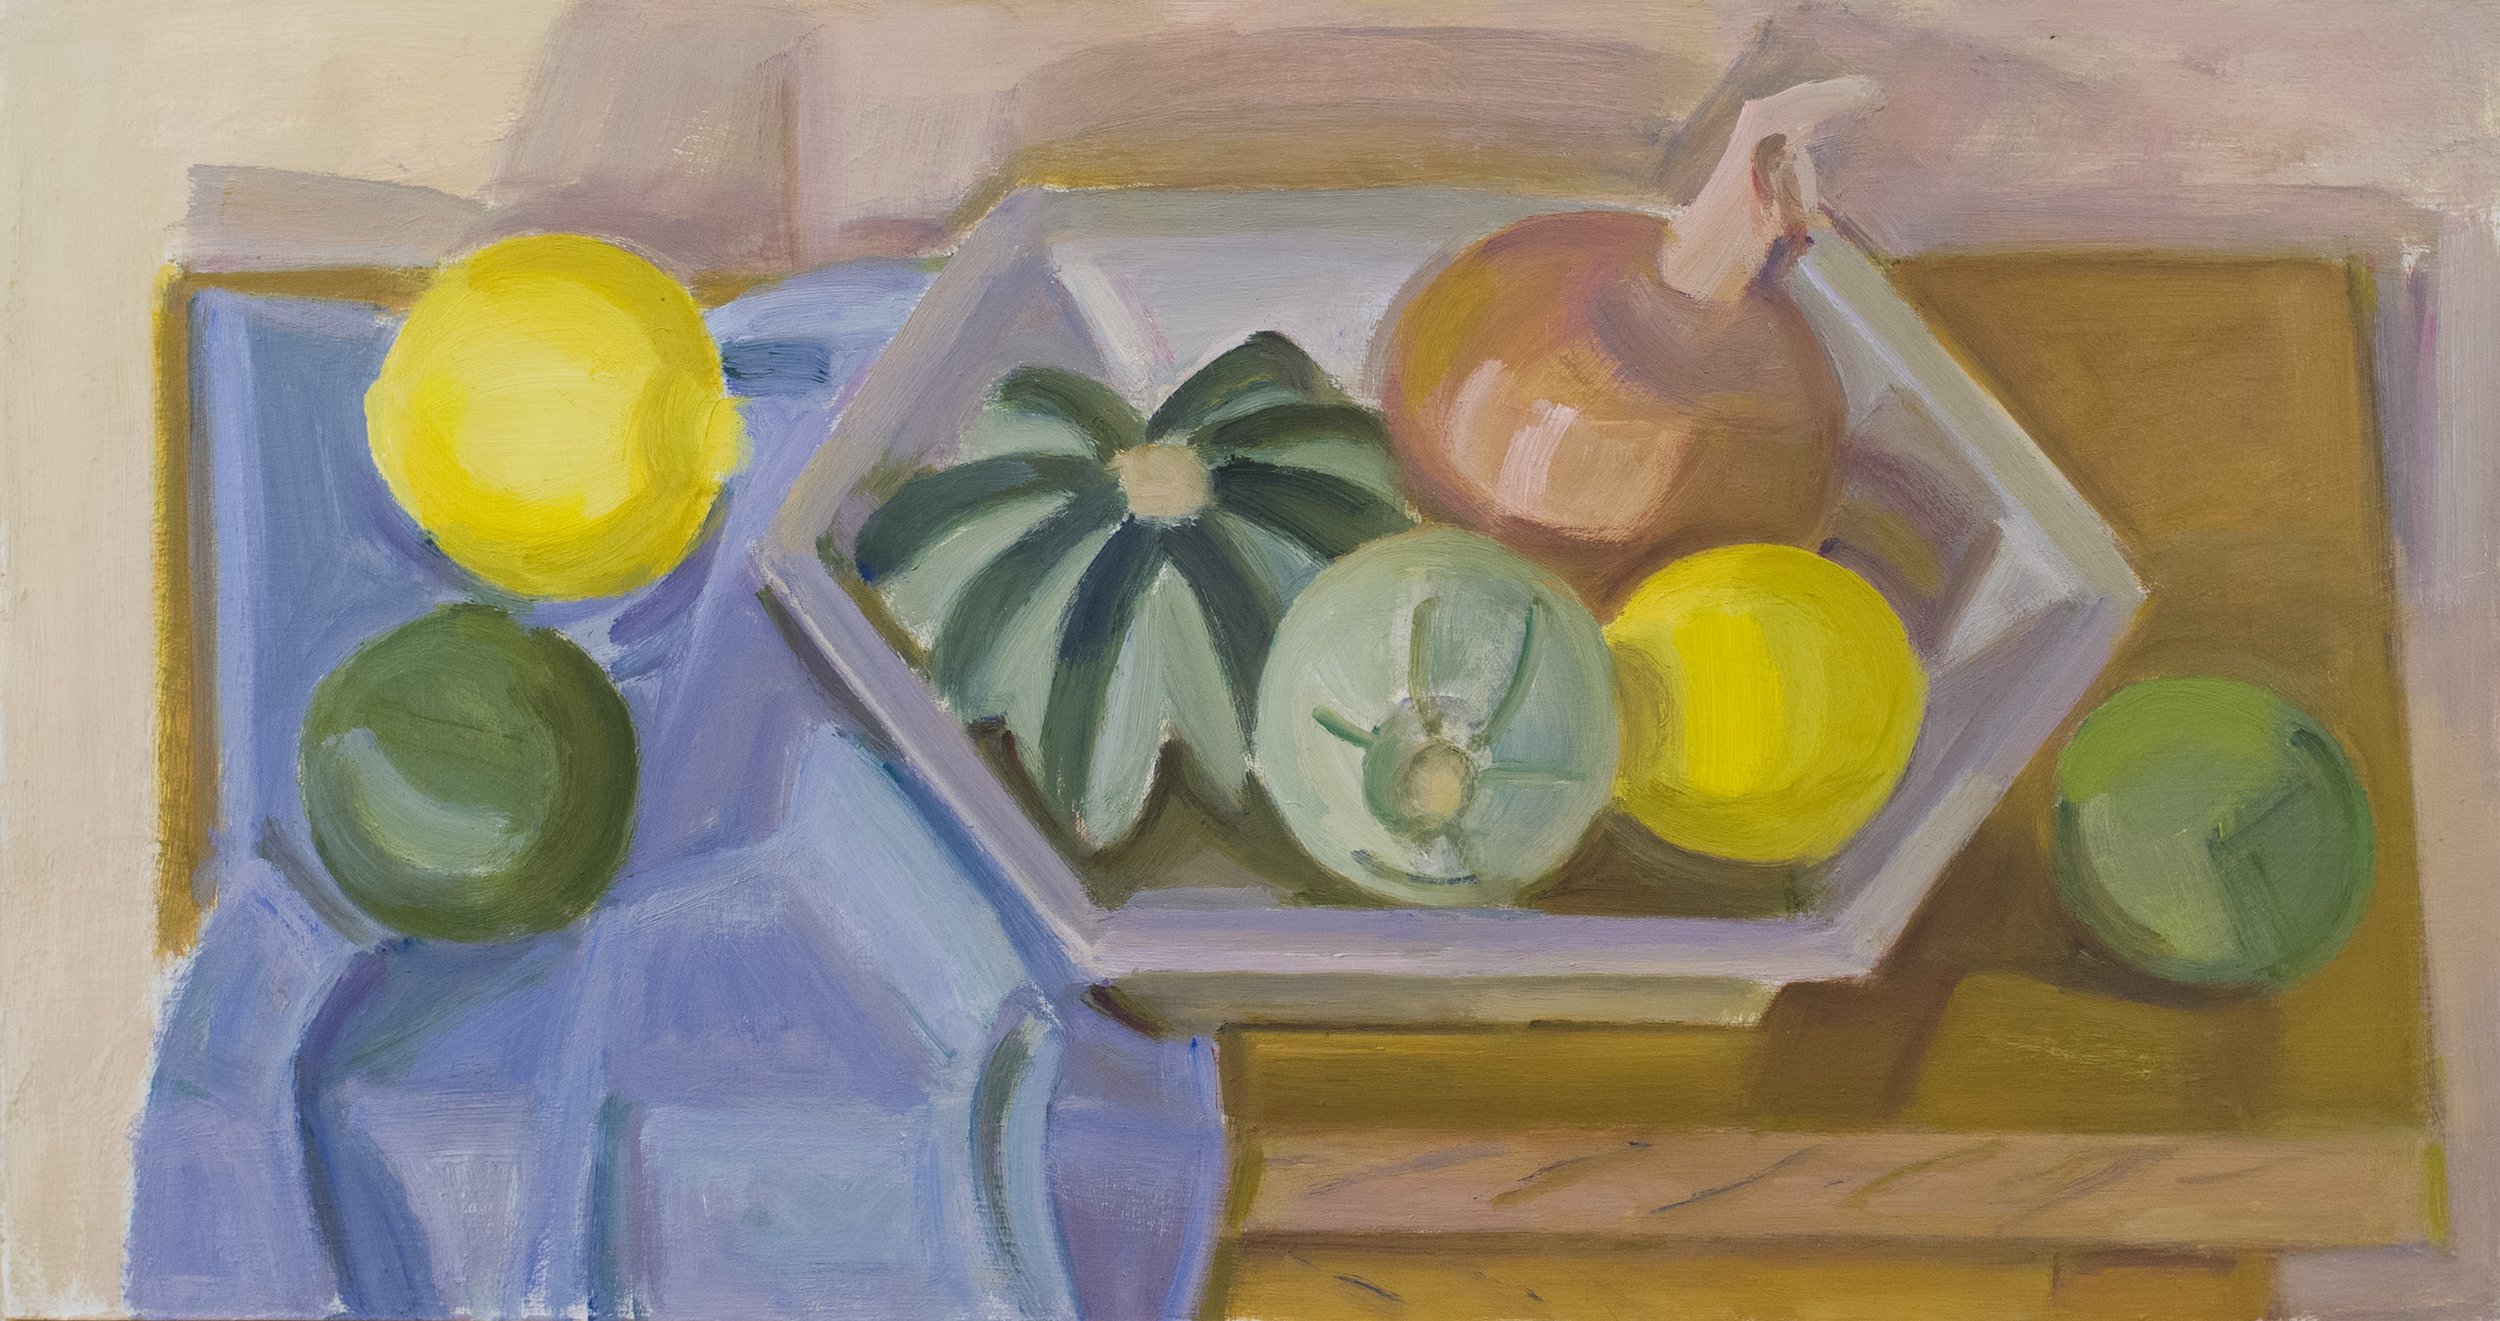   Hexagonal Pie Tin with Striped Squash and Lemon on Blue Cloth , 2019, oil/panel (unframed), 8.5 x 16 in., $1,000 